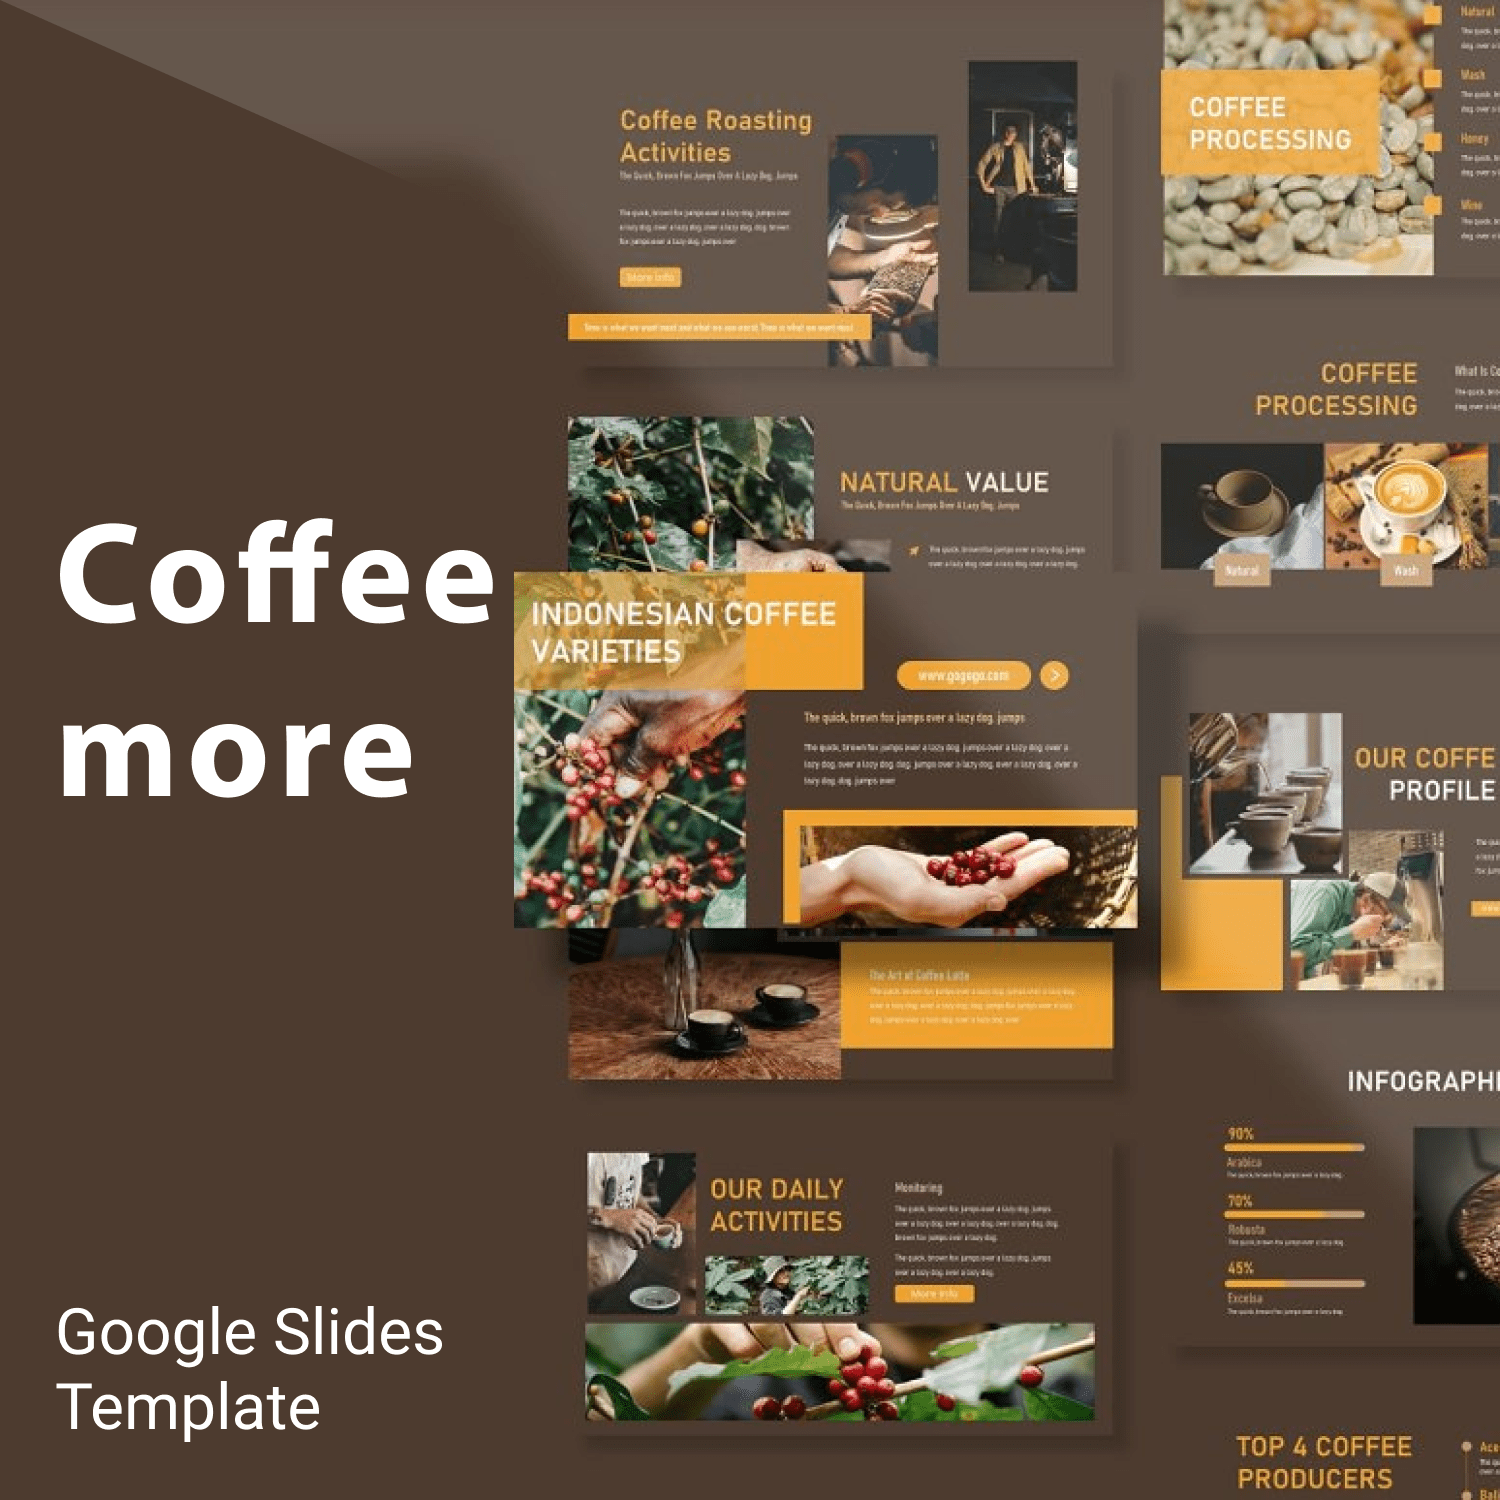 This is a great Google Slides template for multipurpose presentation business or personal needs.